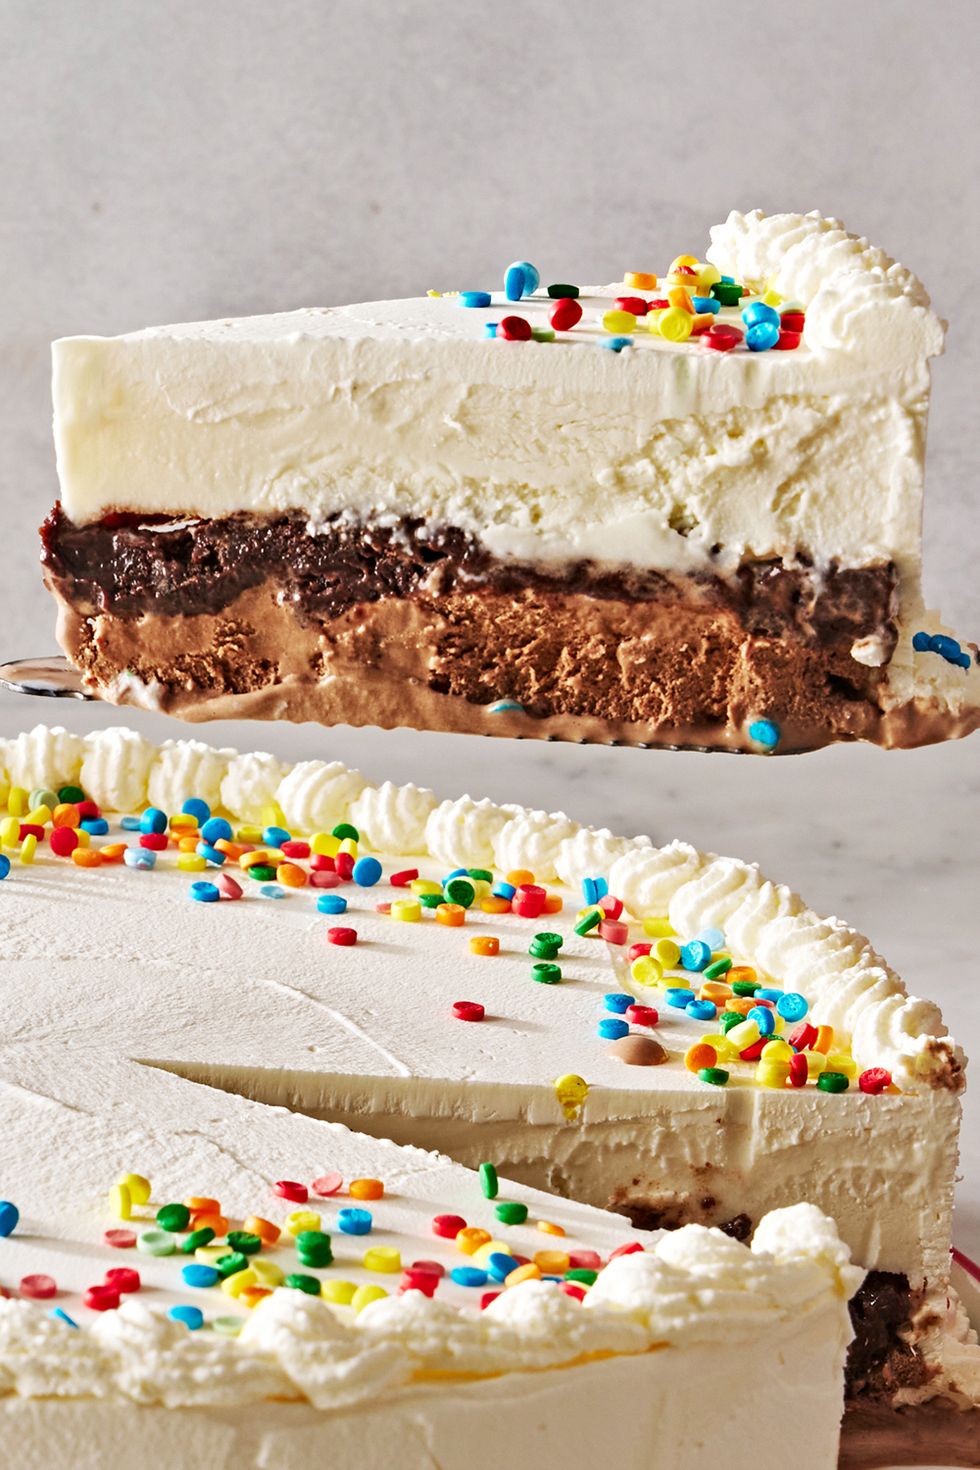 https://hips.hearstapps.com/hmg-prod/images/delish-230227-dairy-queen-ice-cream-cake-002-ab-web-social-6413ad6e4022c.jpg?crop=0.8333333333333334xw:1xh;center,top&resize=980:*